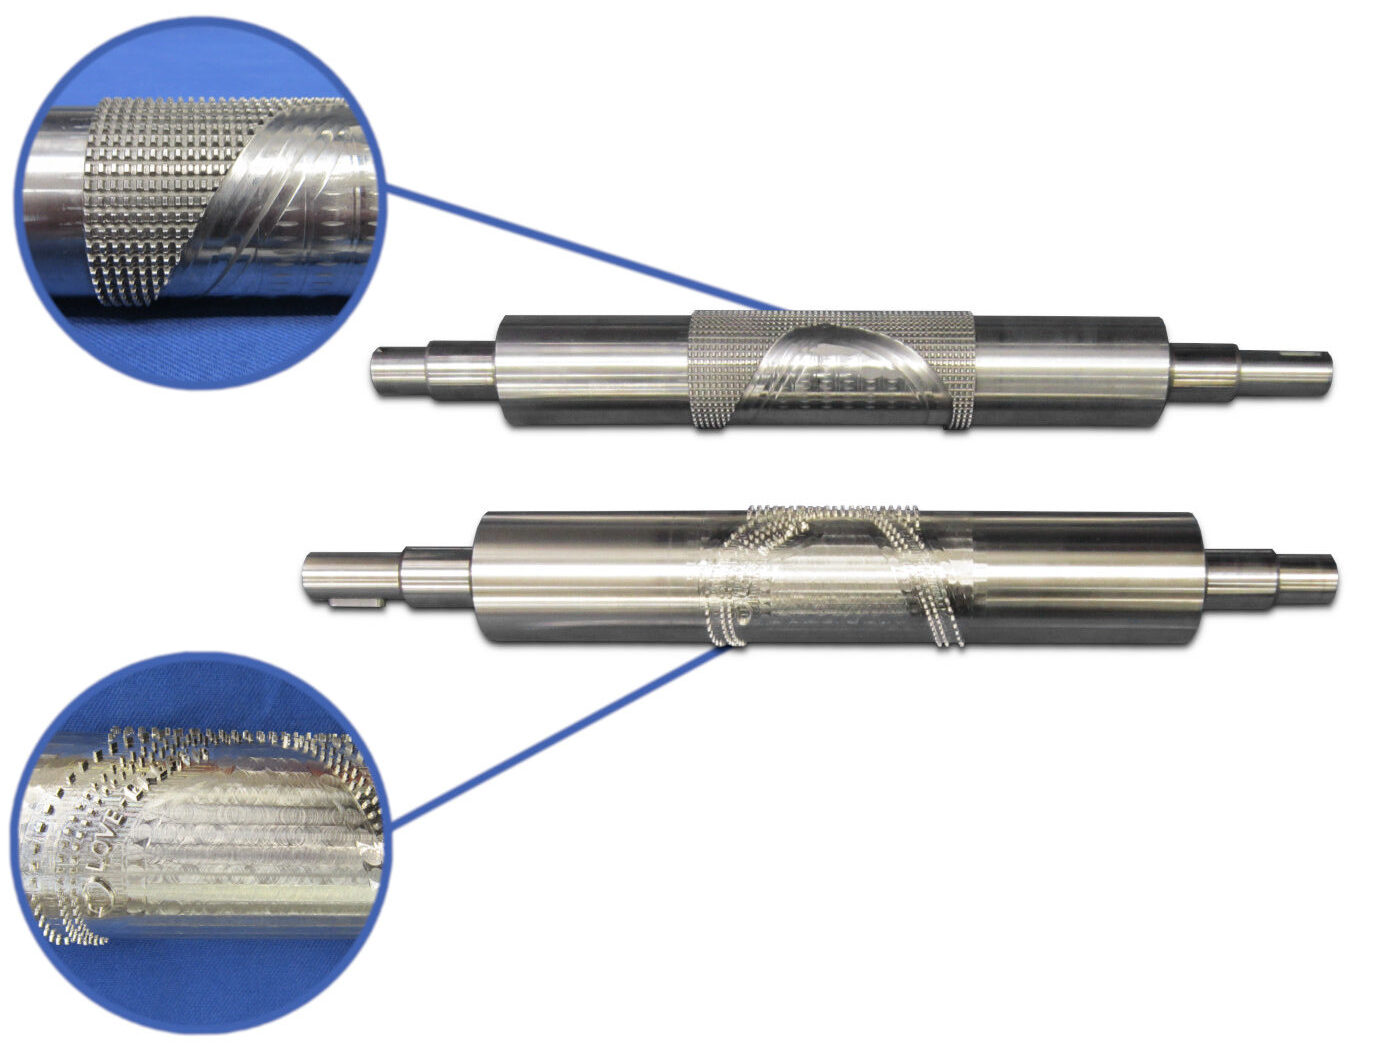 Units and Rollers for rotary ultrasonic bonding